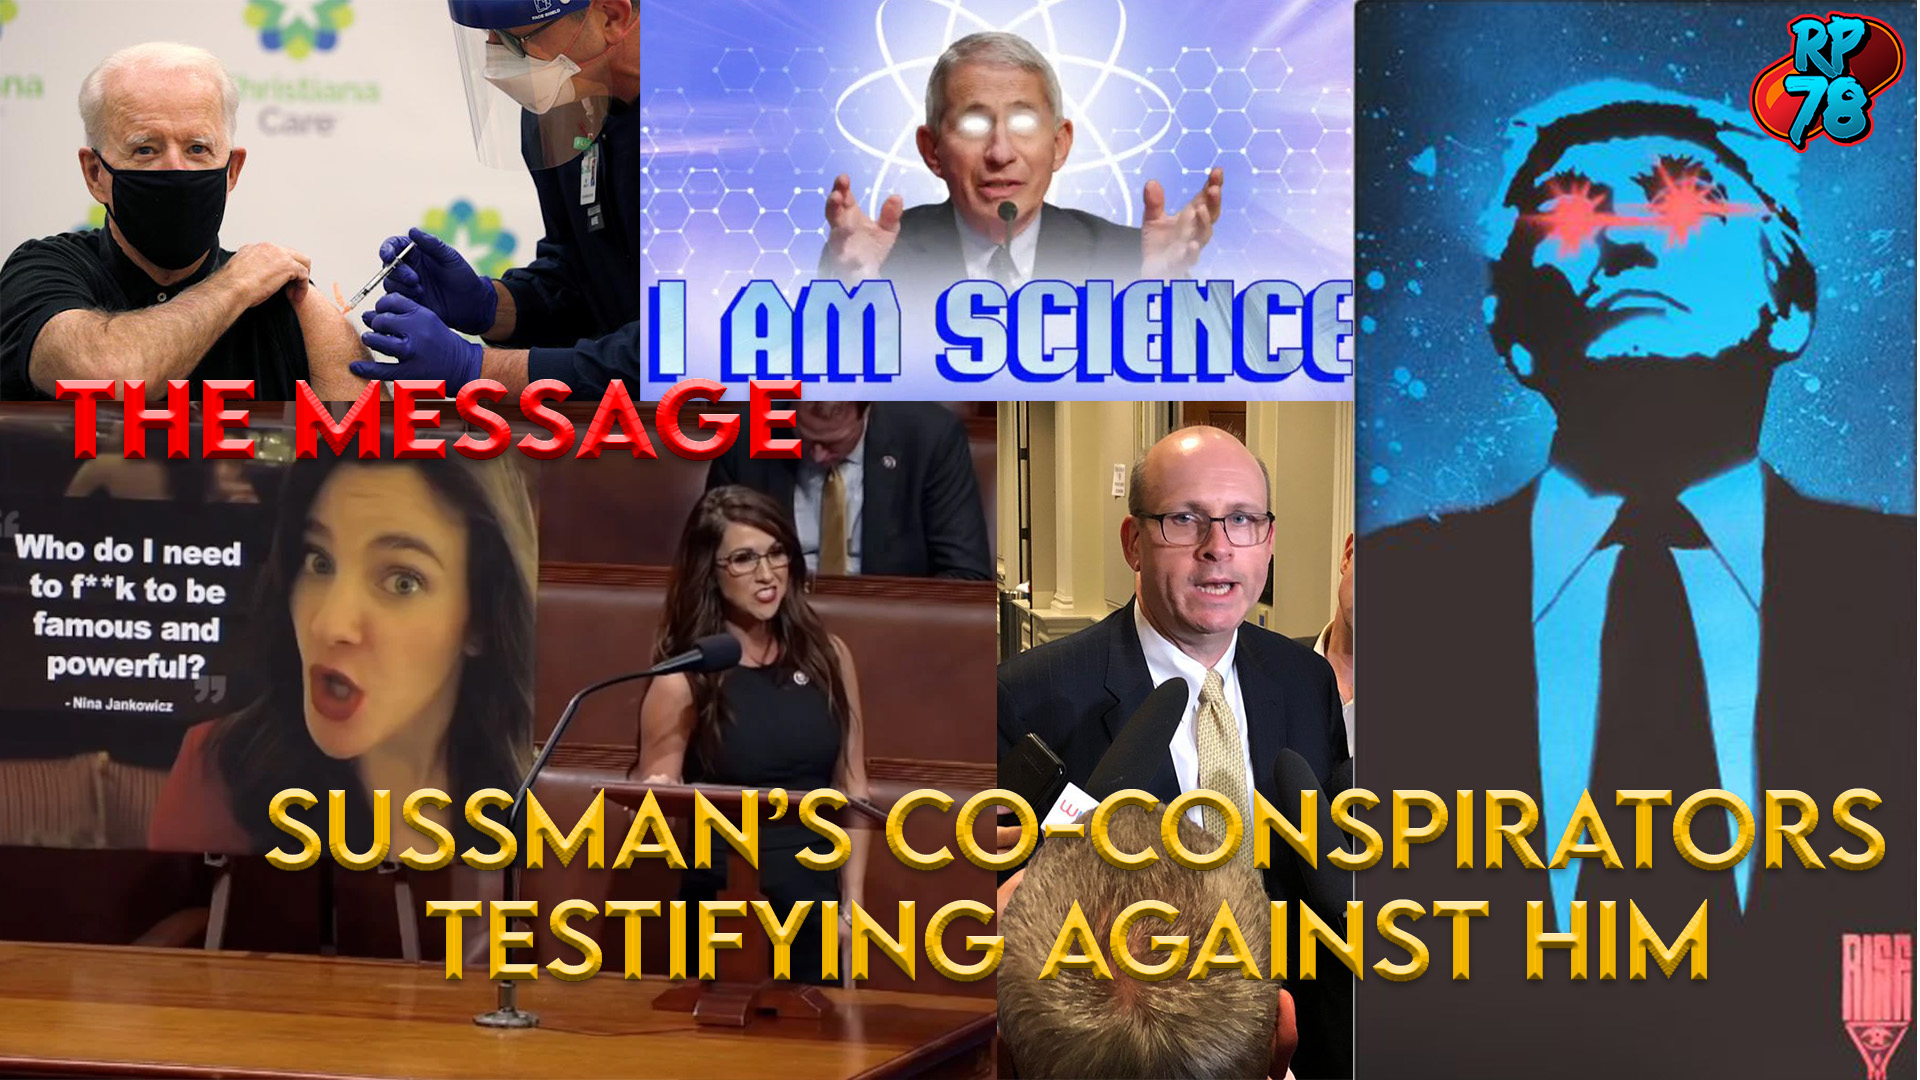 Feds Researched Ultra Maga & Vaxx Messaging, Boebert in Danger & Sussman Testimony